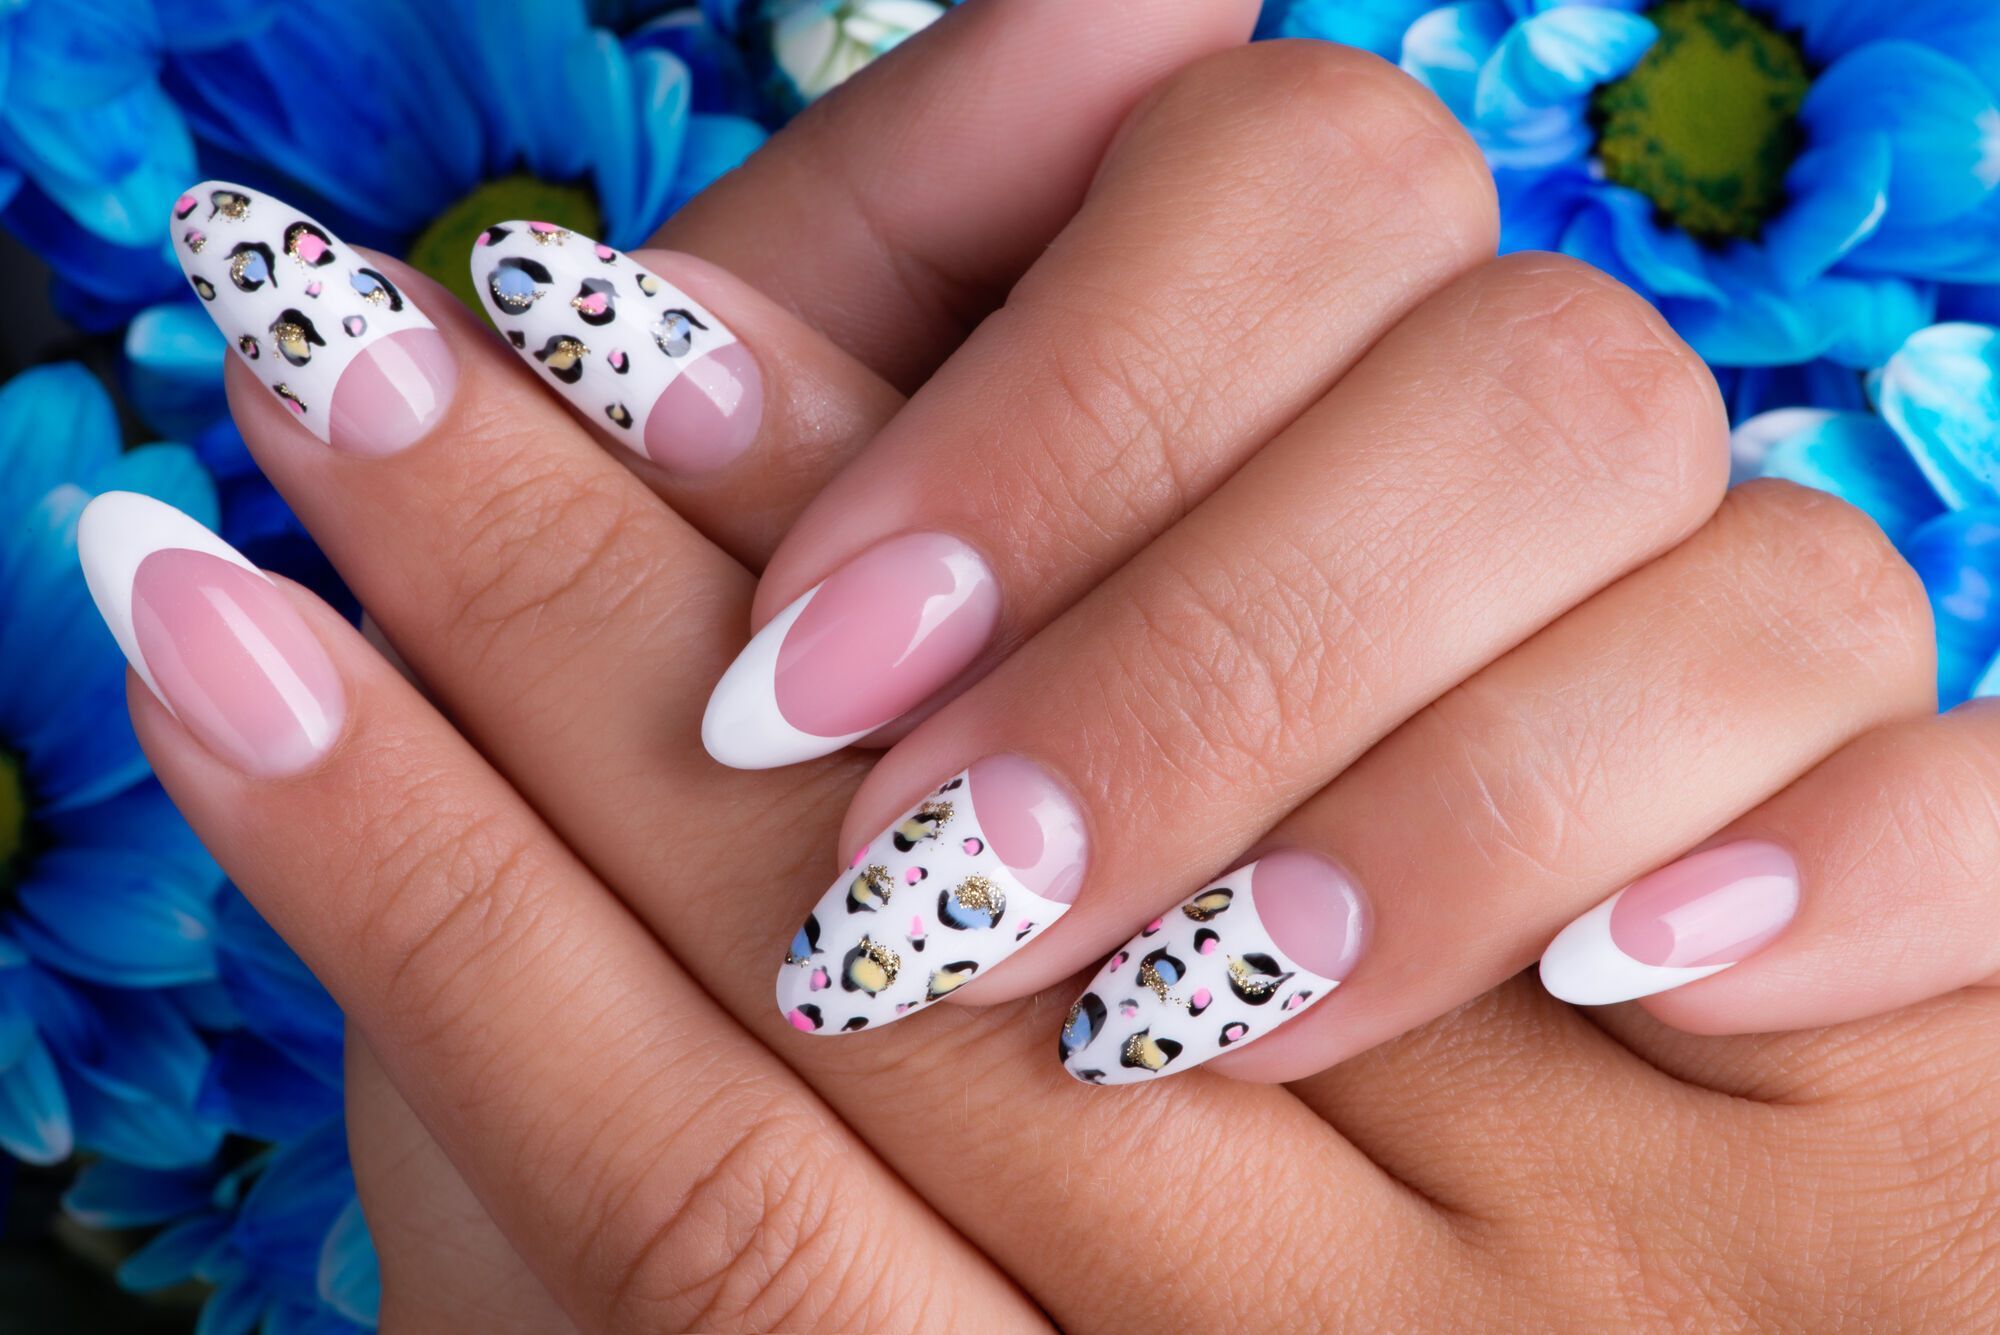 5 ''outdated'' manicure trends that will come back in fashion this spring. Photo